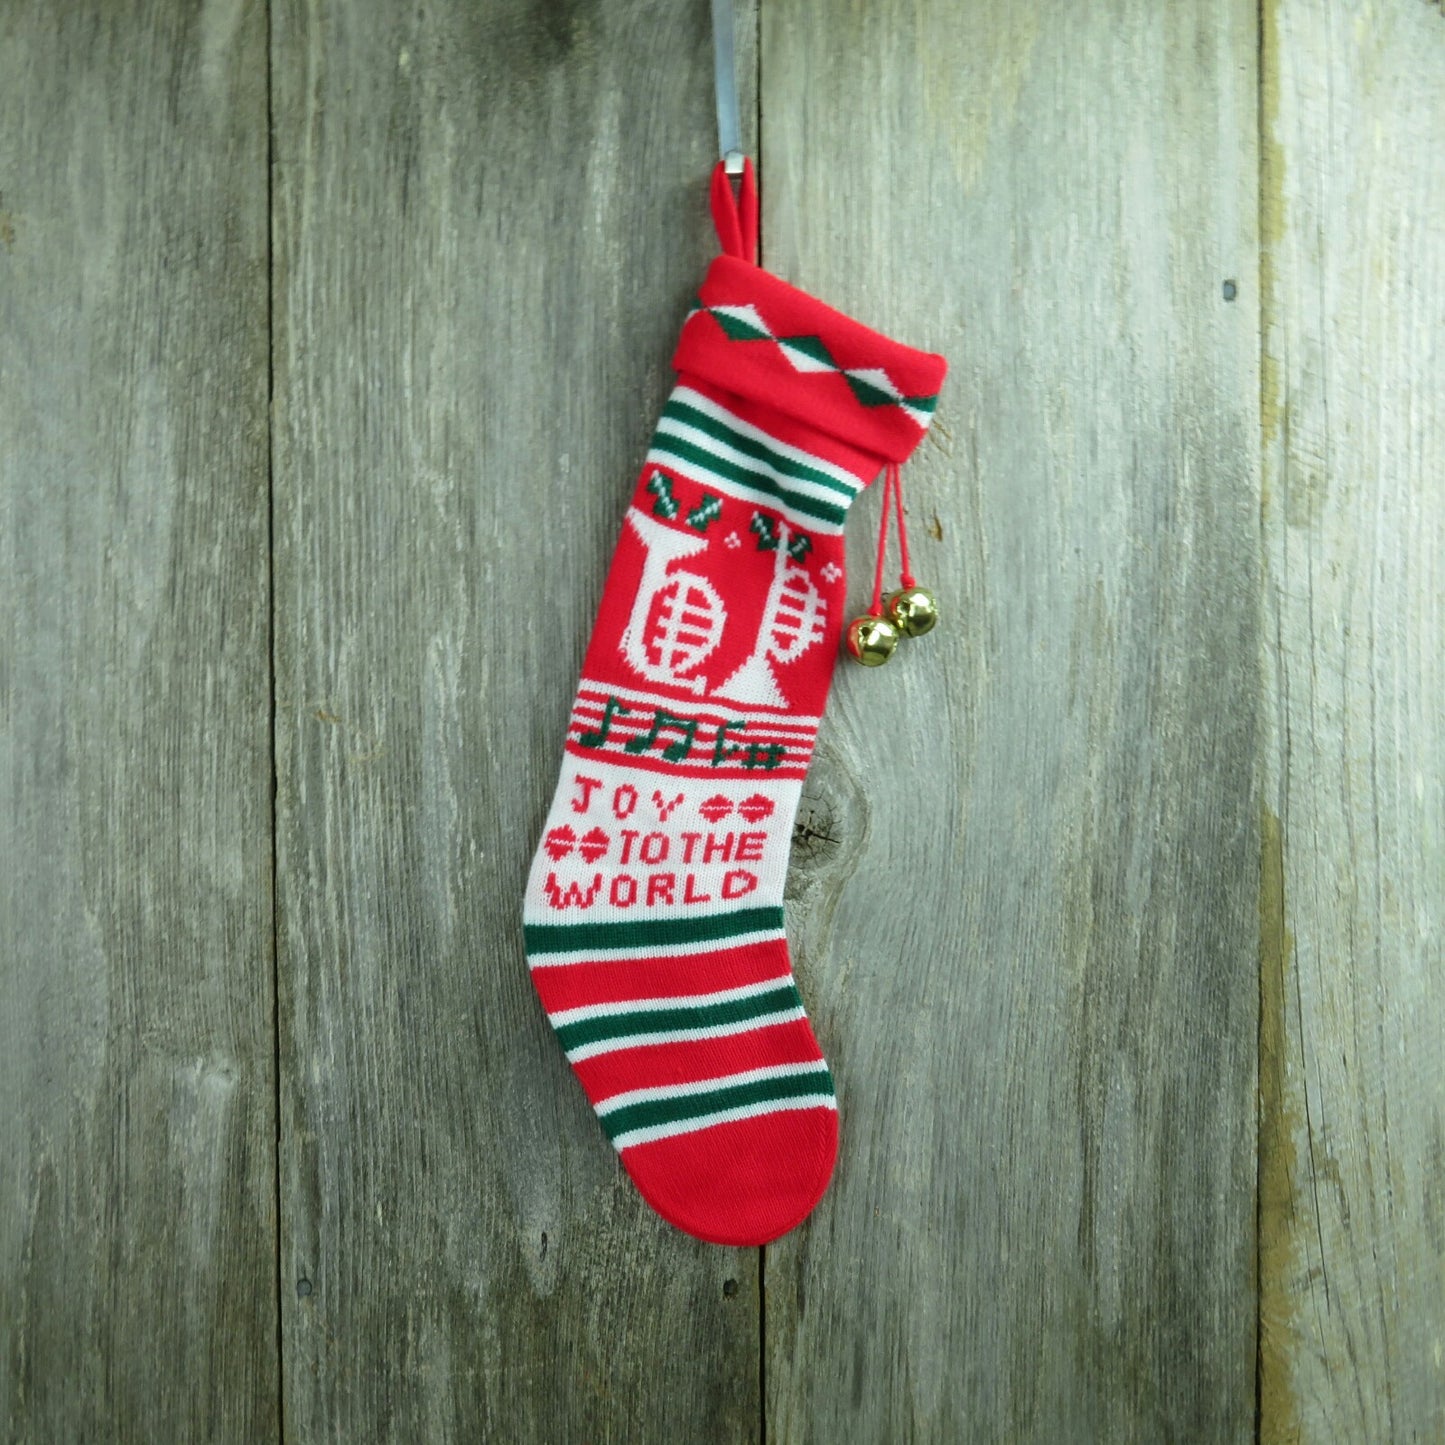 Vintage Knit Music Stocking Horns Christmas Red White Joy To The World Notes Holiday Decor 1980s - At Grandma's Table